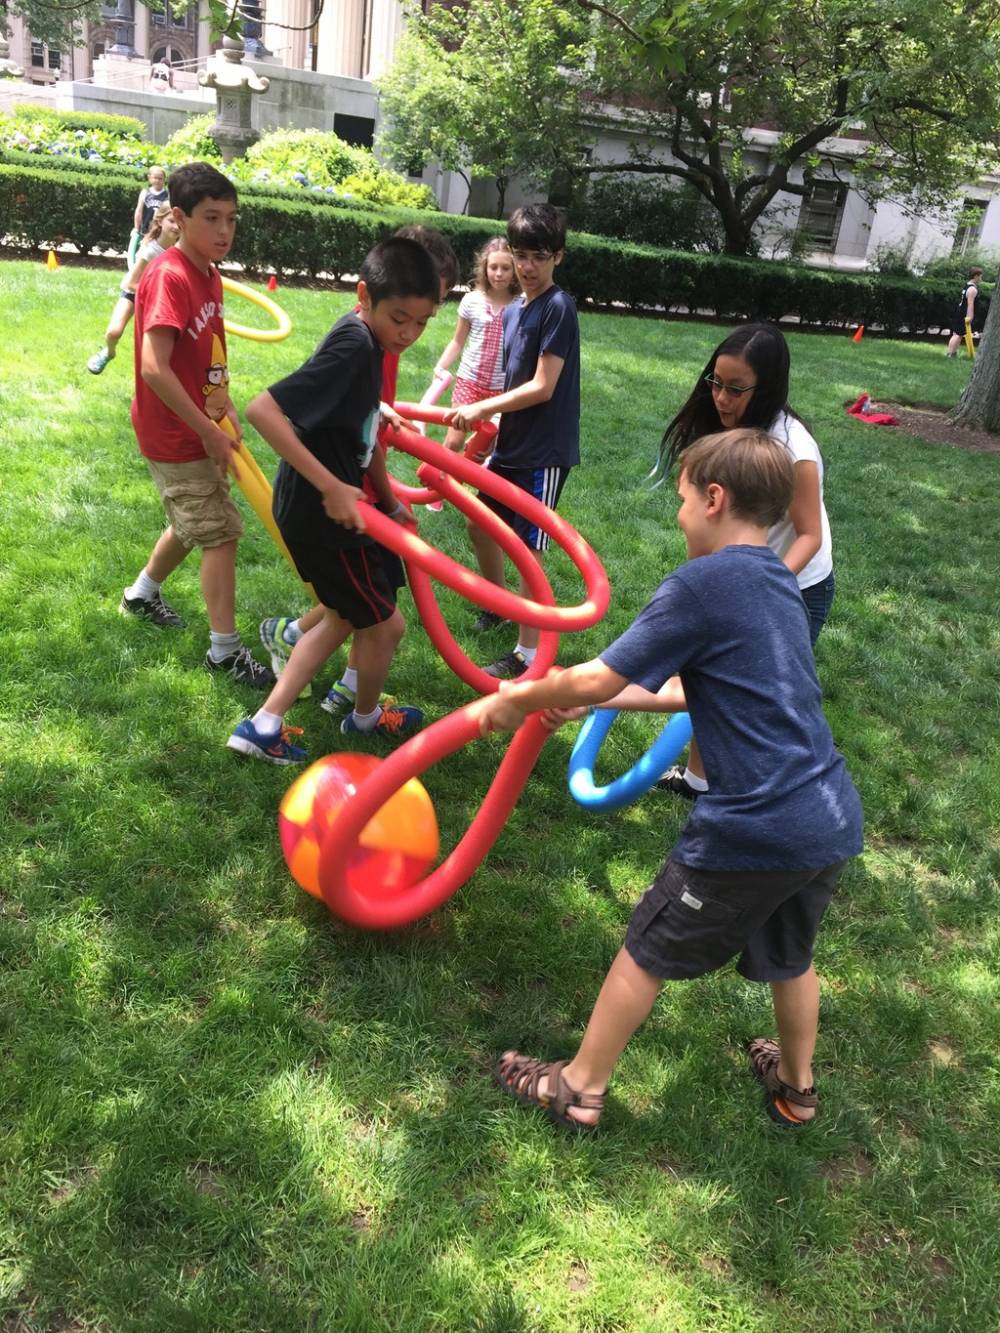 TOP NEW YORK AQUATICS CAMP: Columbia University - Little Lions Camp is a Top Aquatics Summer Camp located in New York New York offering many fun and enriching Aquatics and other camp programs. 